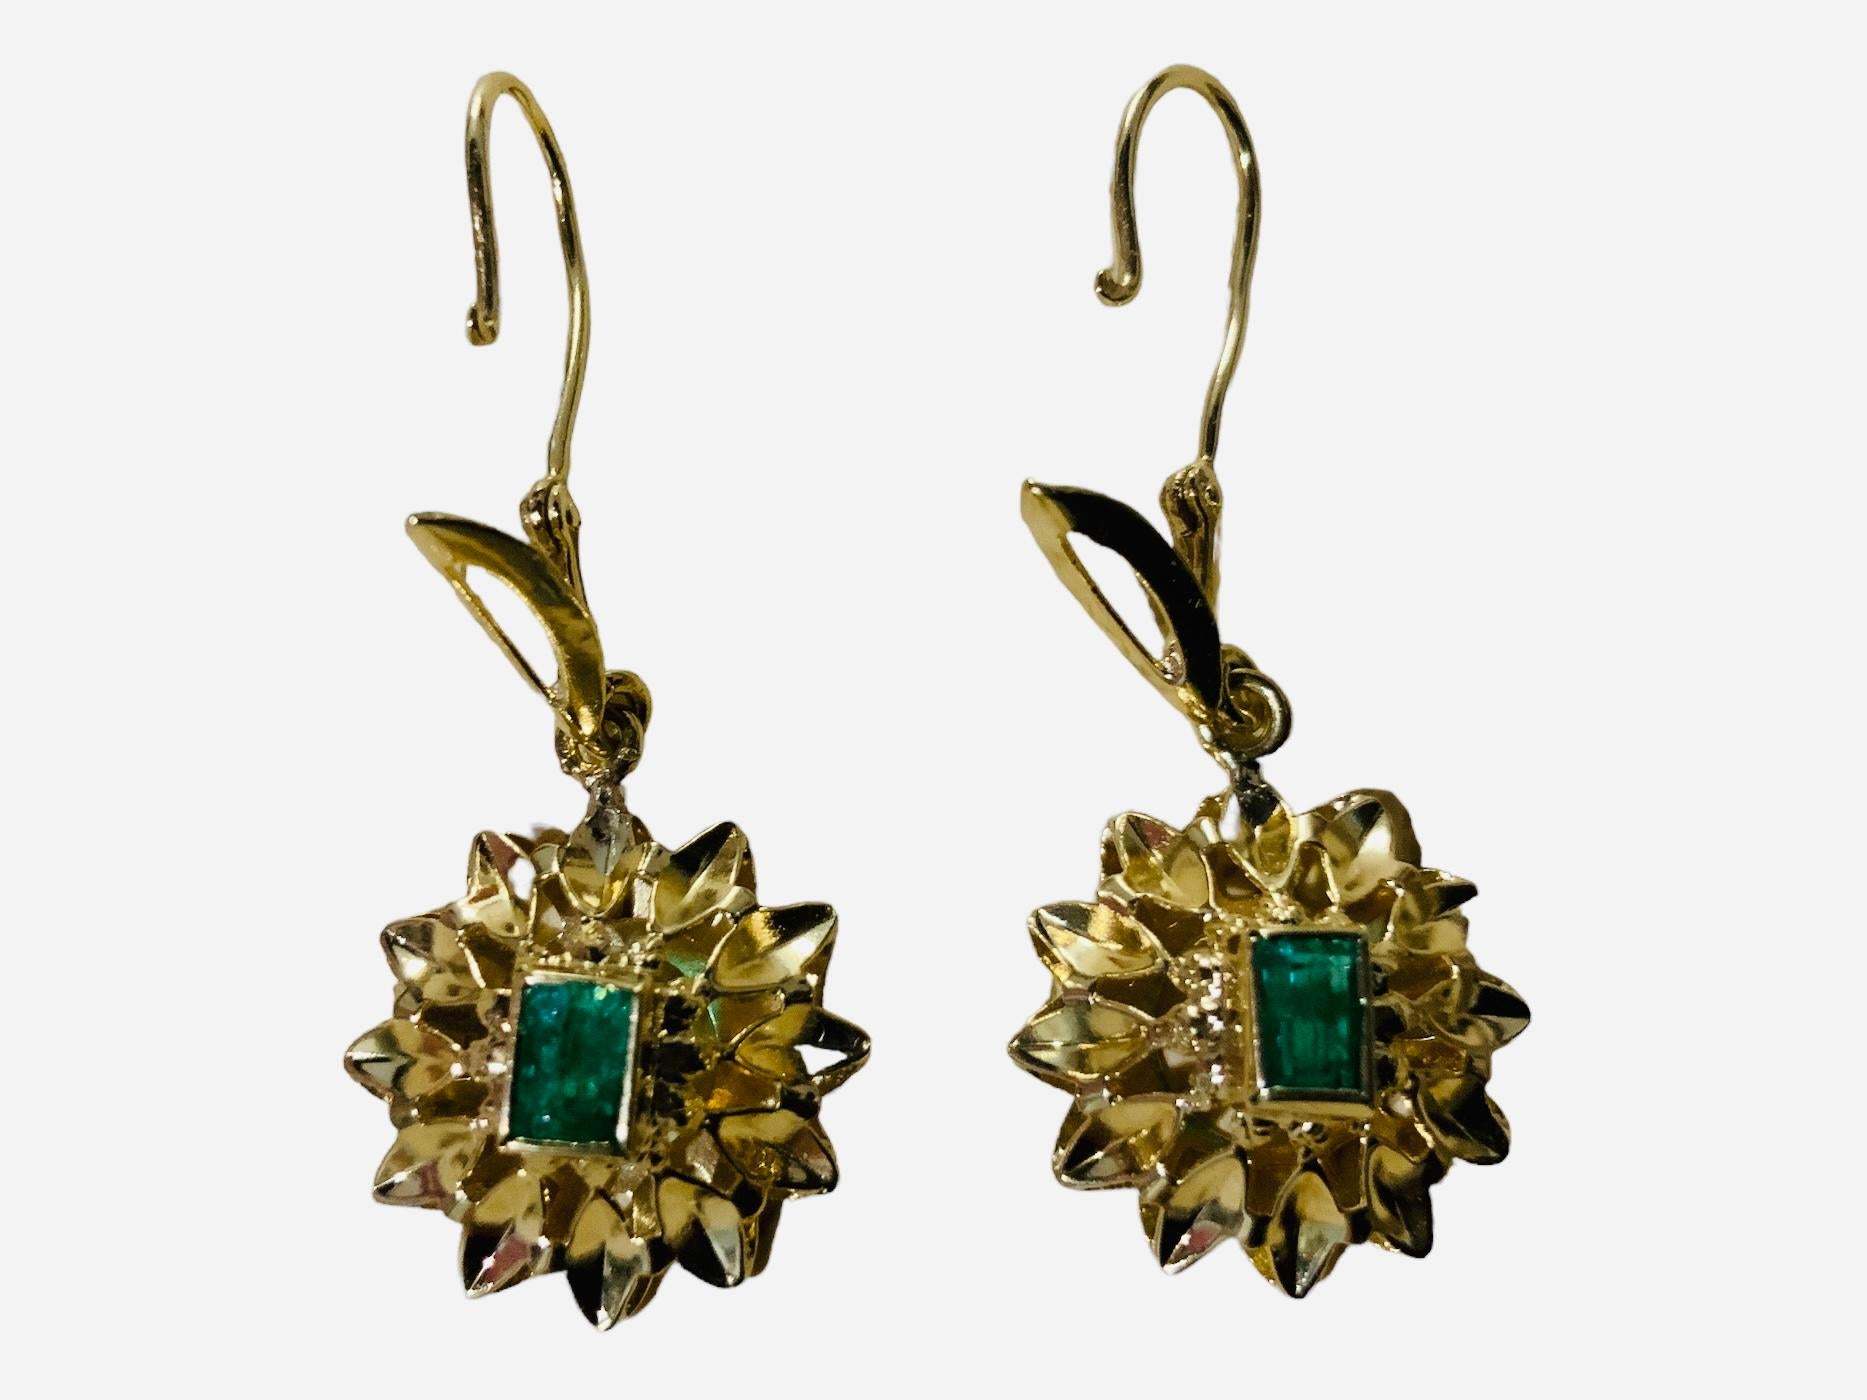 This is a Pair of 18K yellow gold Emerald Drops Earrings. The emerald cut tiny emeralds are in bezel setting and mounted in 18K yellow gold. A gold wreath of leaves adorns the back of the mounted emeralds. Both earrings are hallmarked 18K. They are